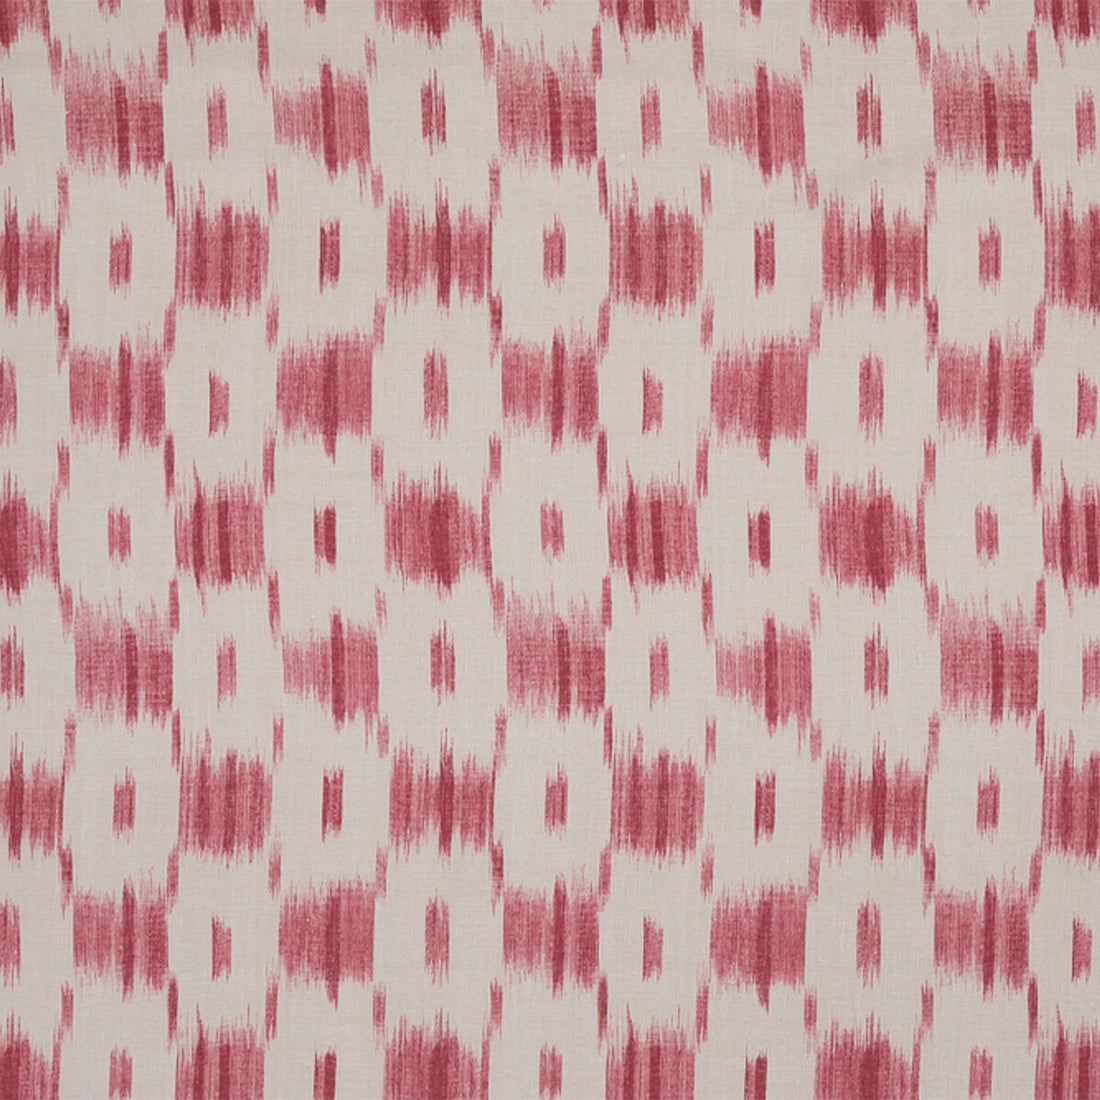 Ikat Check fabric in rose color - pattern BFC-3702.197.0 - by Lee Jofa in the Blithfield collection